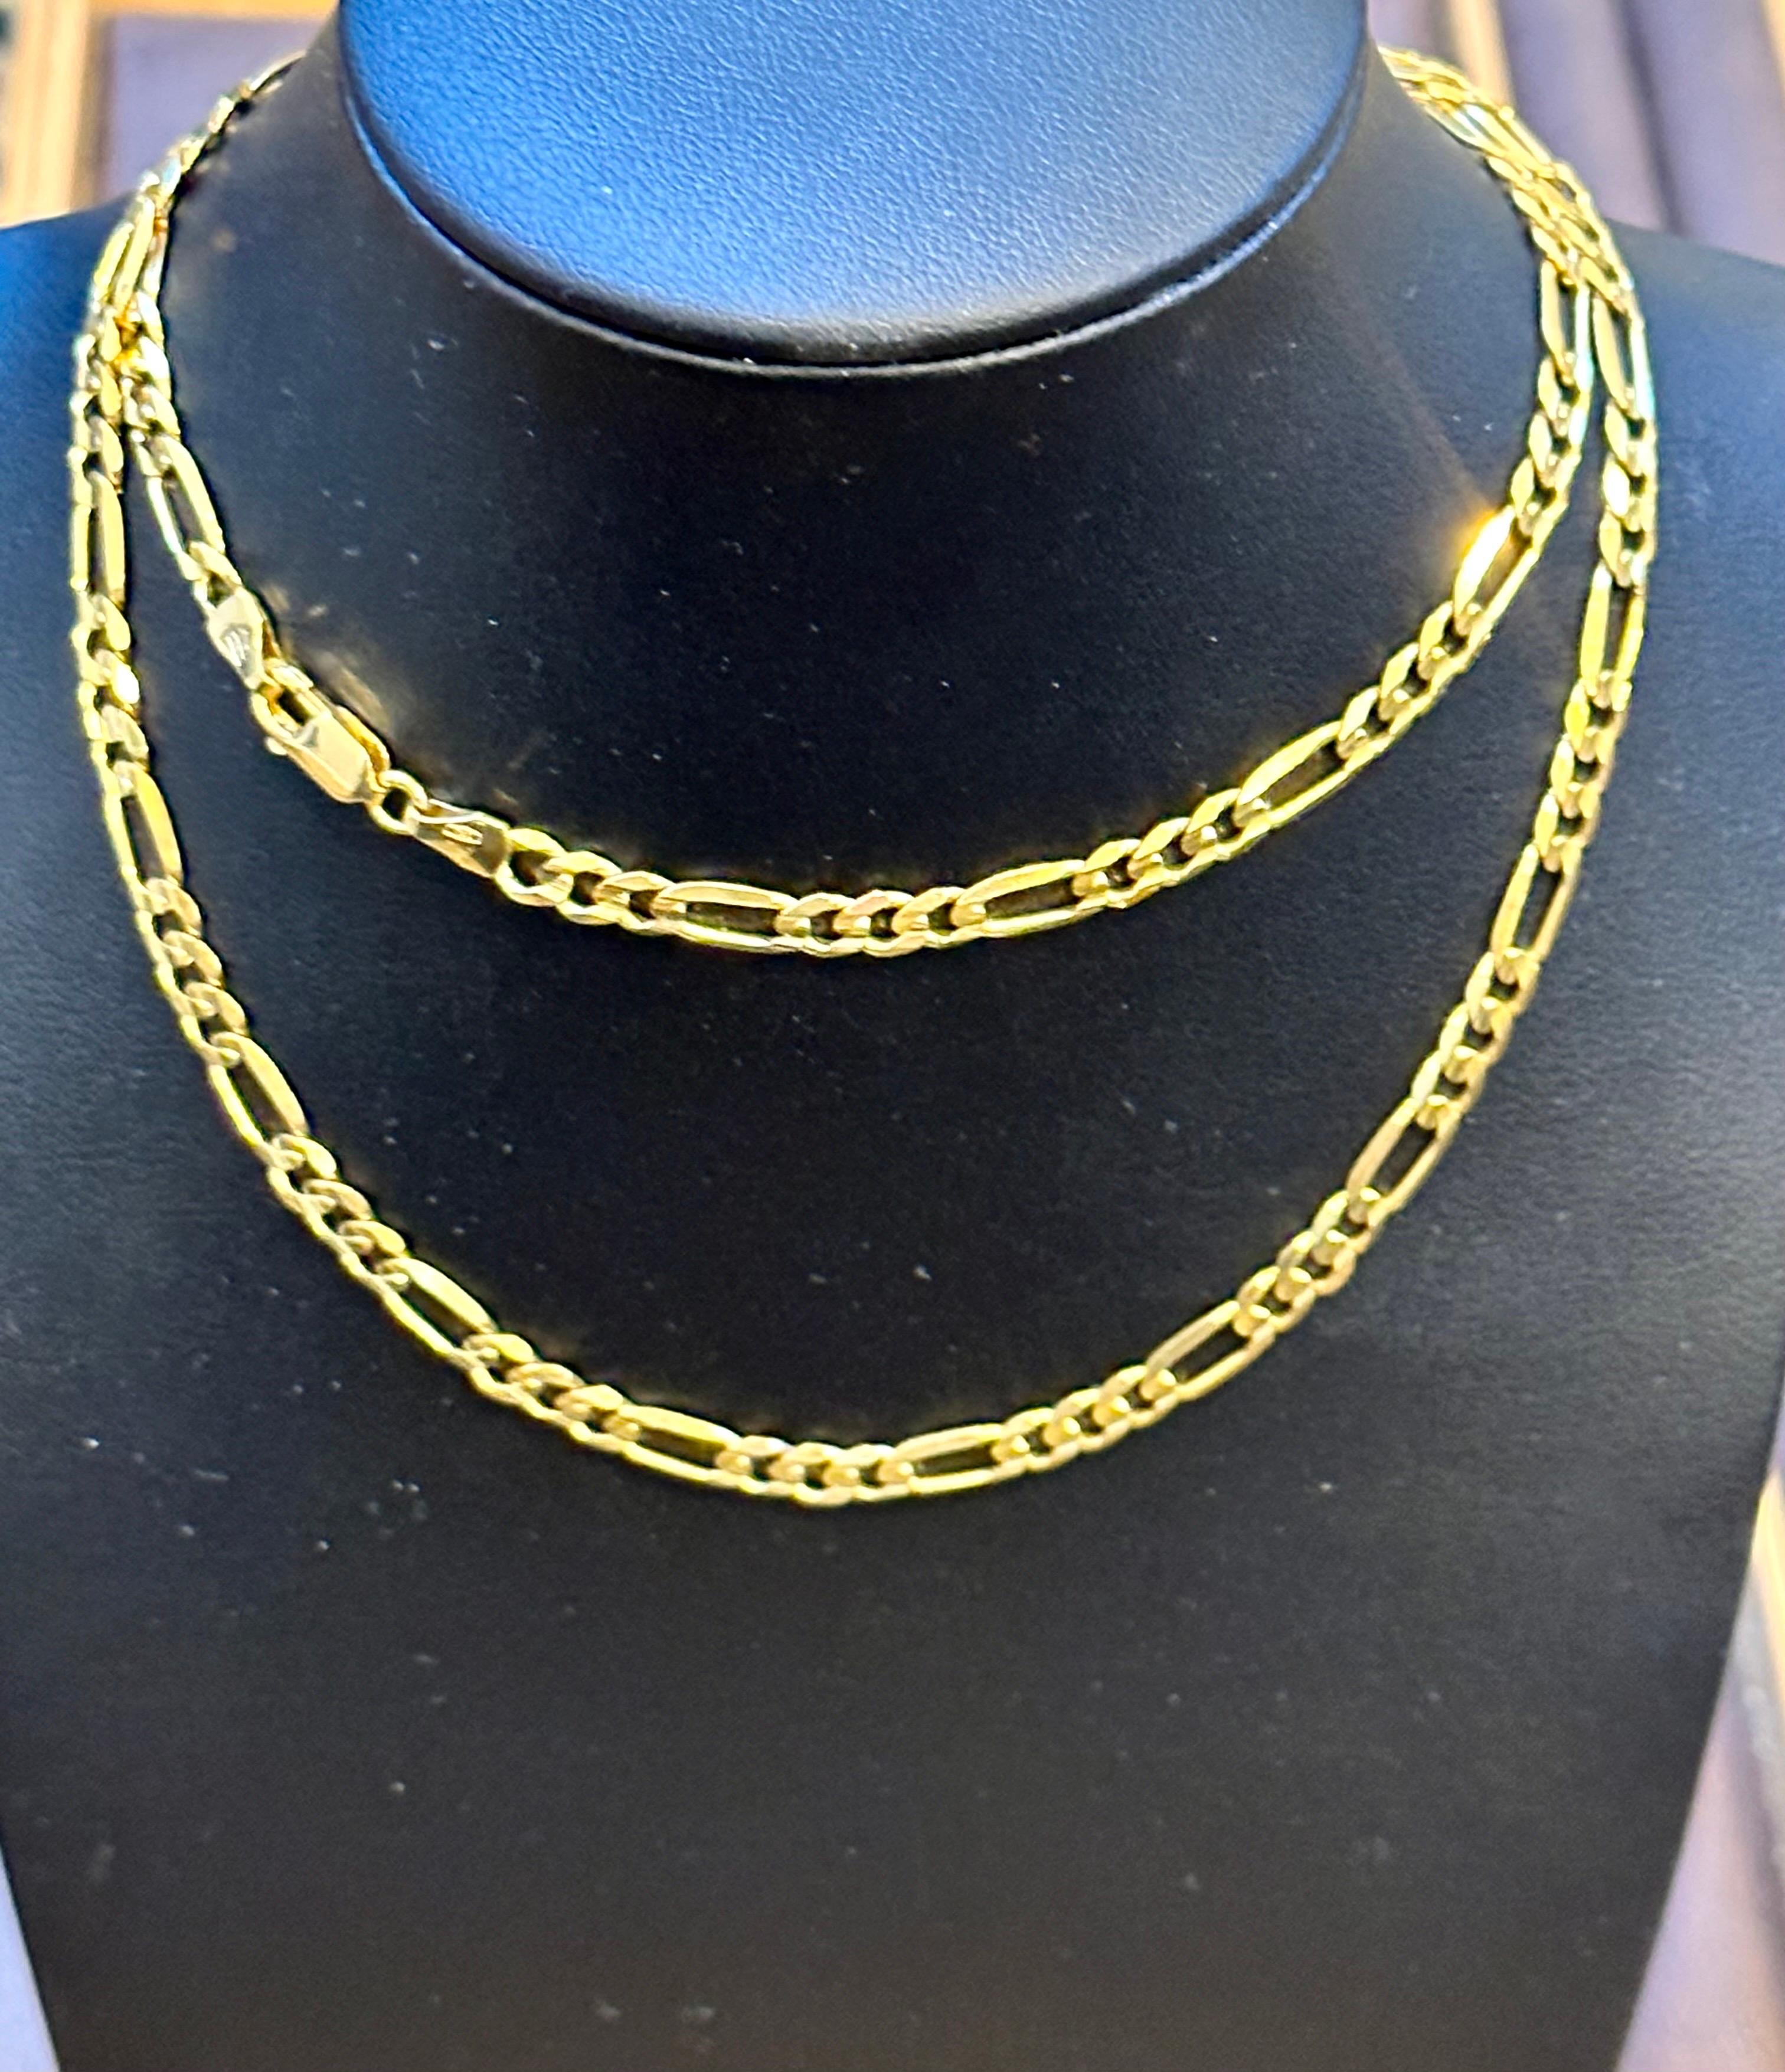 Women's or Men's Vintage 18 Karat Yellow Gold 20 Gm Figaro Chain Necklace, Made in Italy